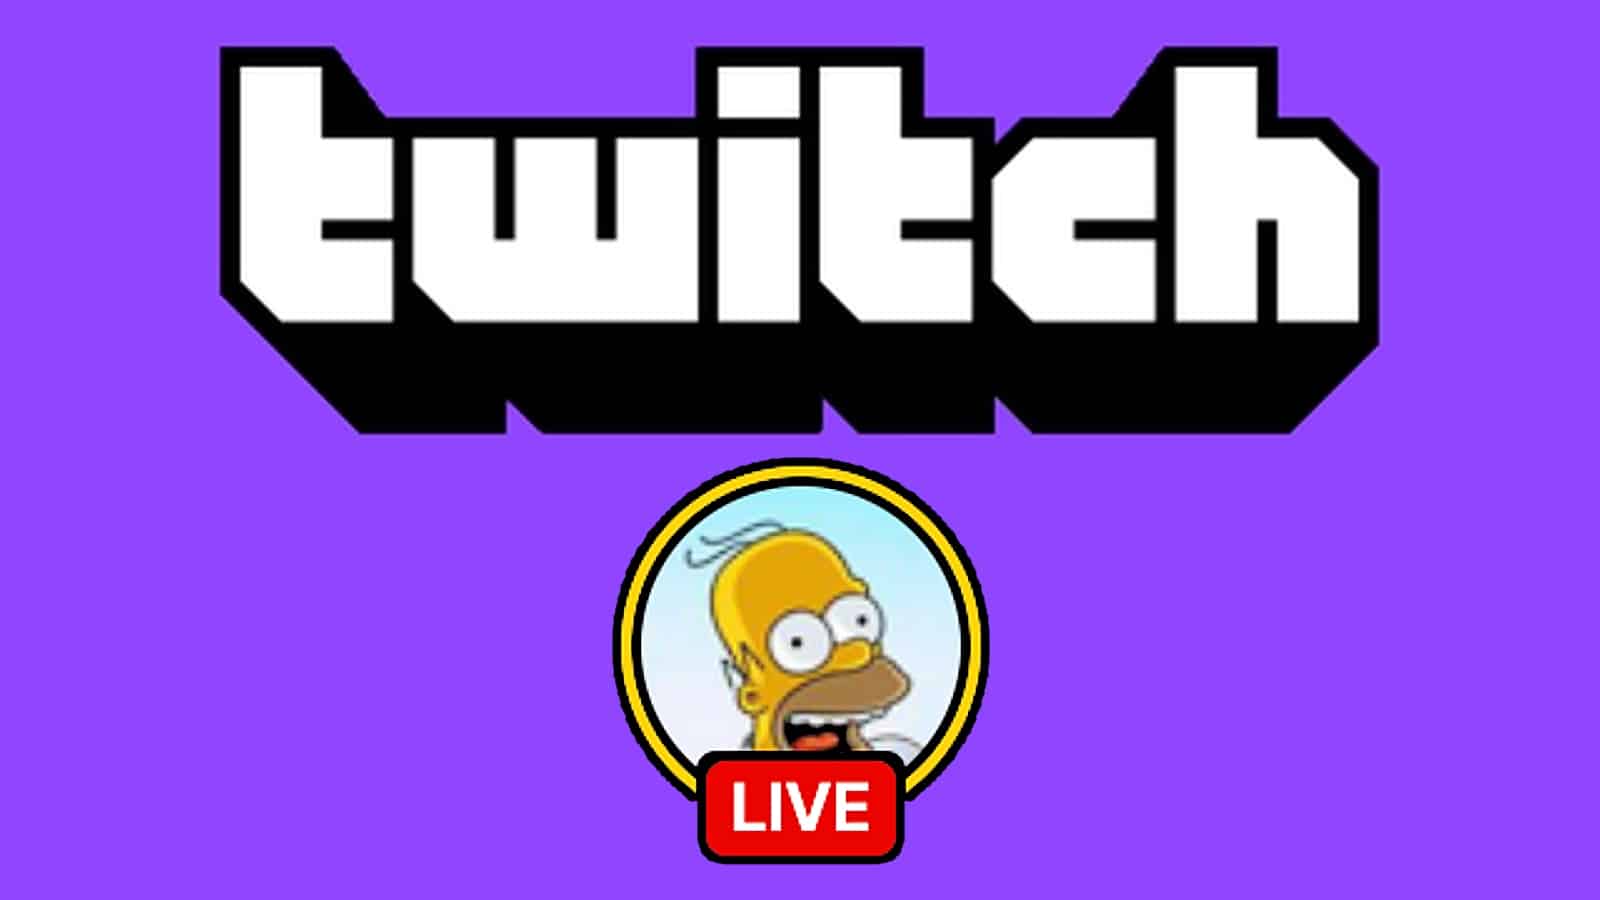 Twitch logo with live The Simpsons channel